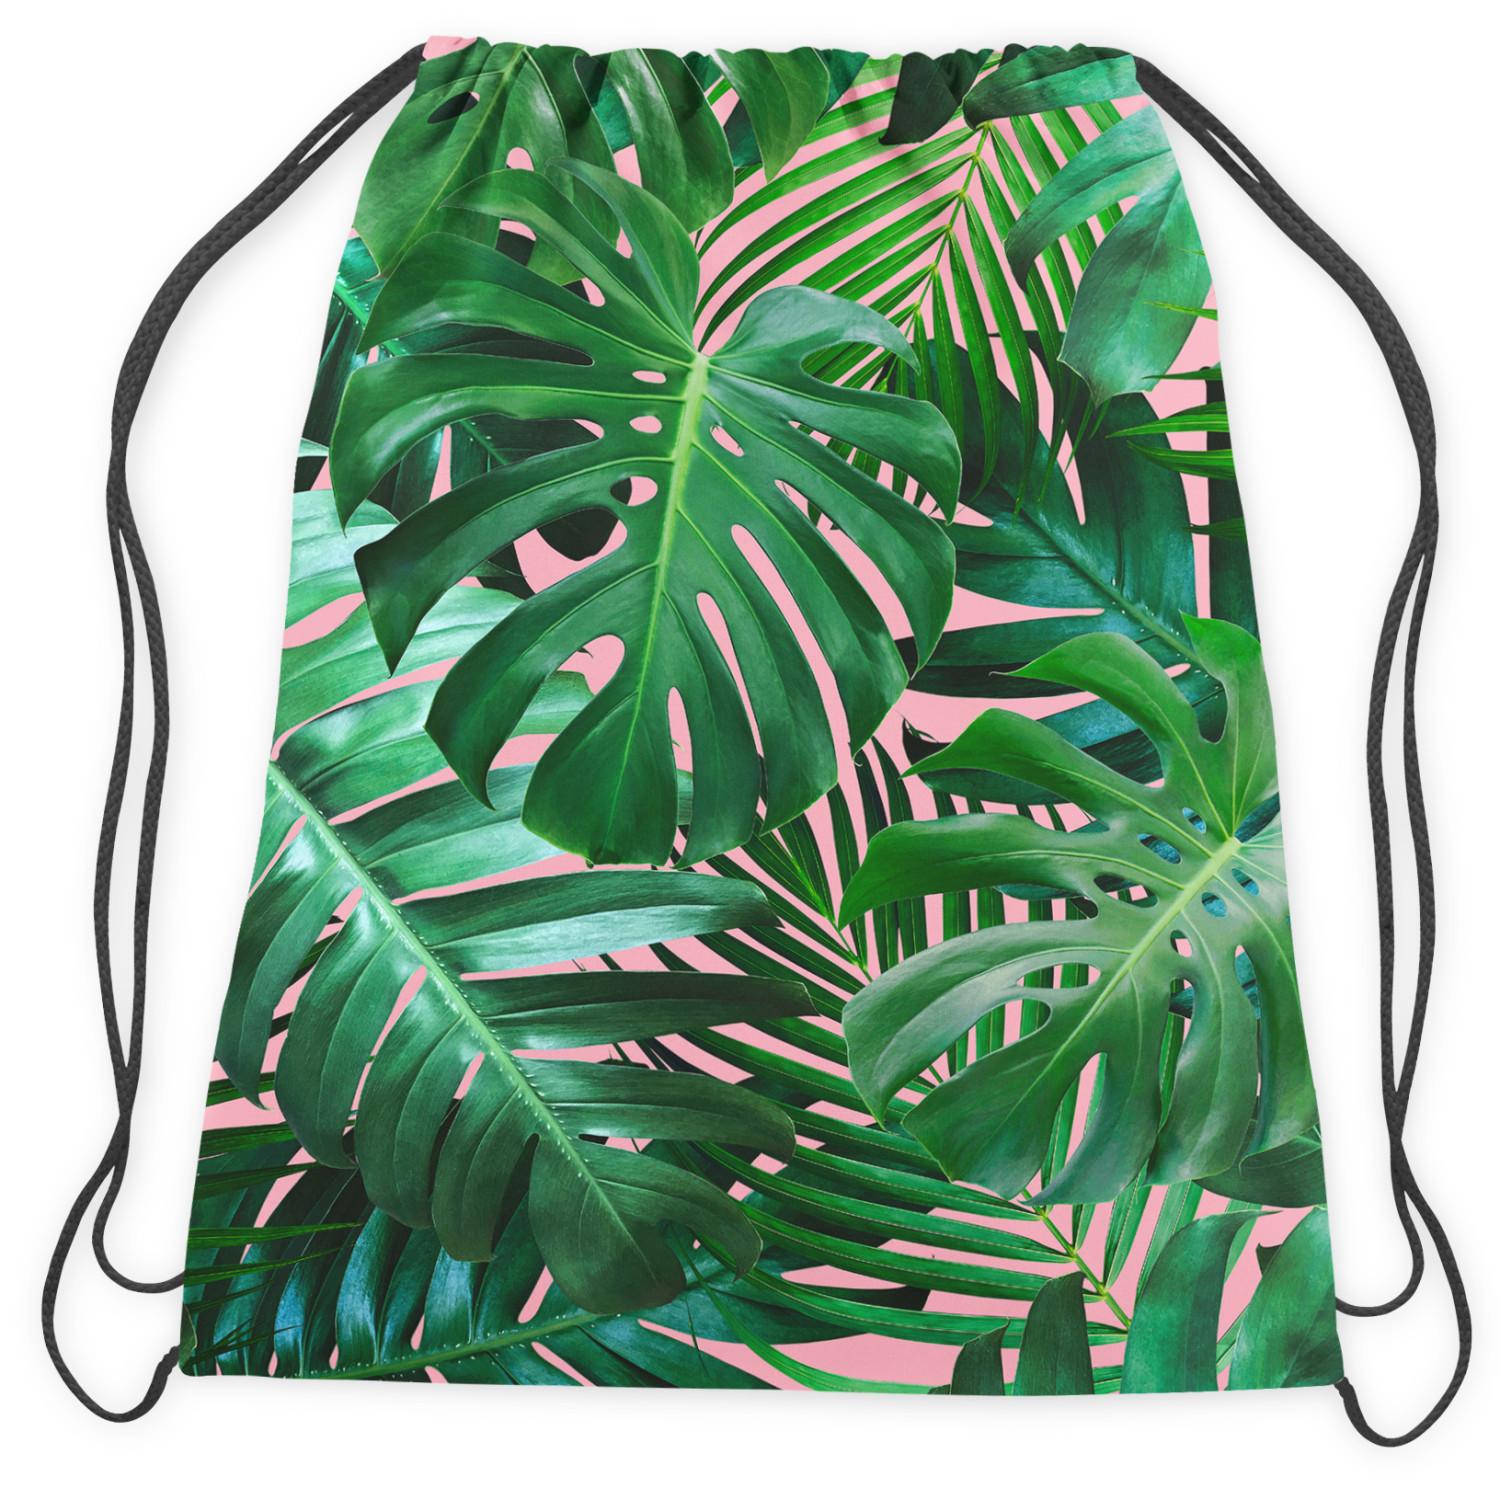 Mochila Botanical lace - a floral composition in greens and pinks